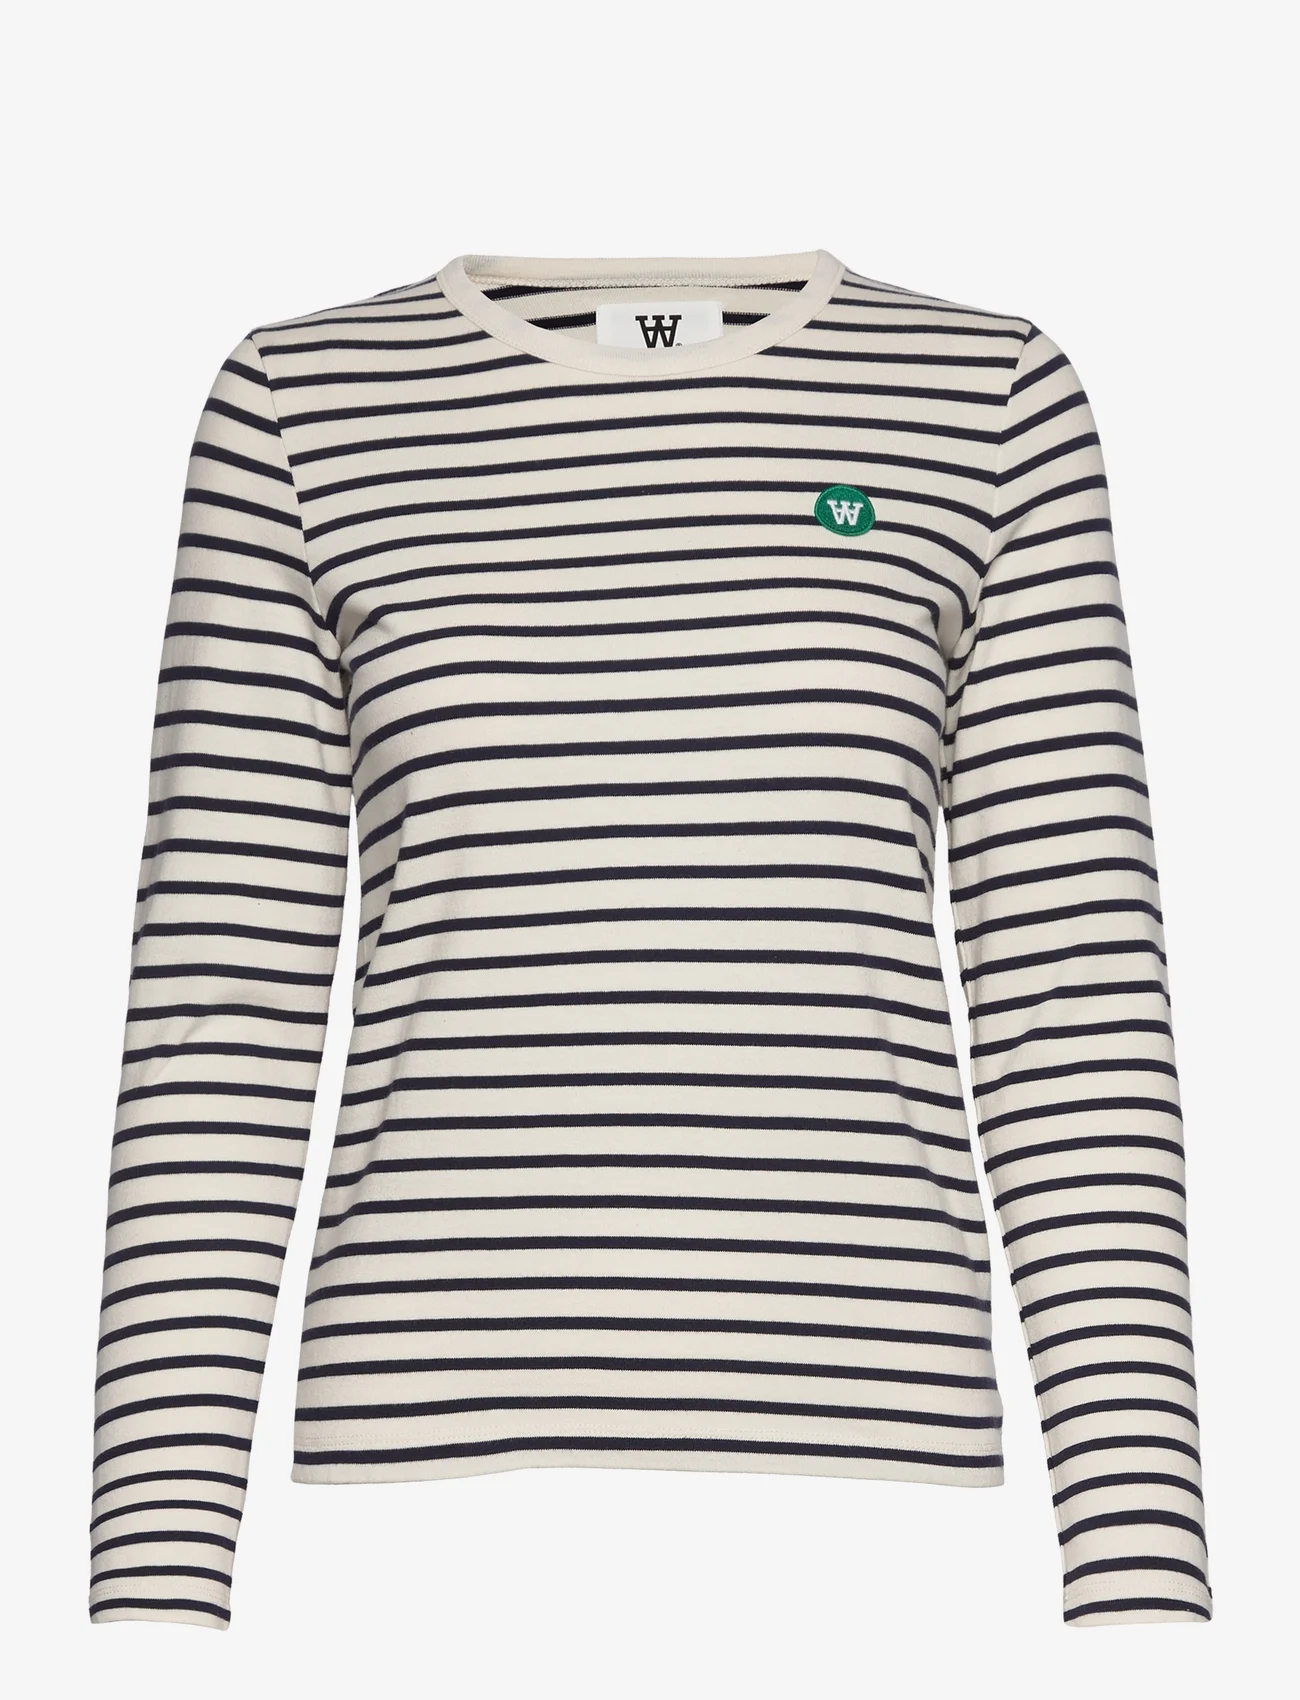 Double A by Wood Wood - Moa stripe long sleeve GOTS - t-shirt & tops - off-white/navy stripes - 0